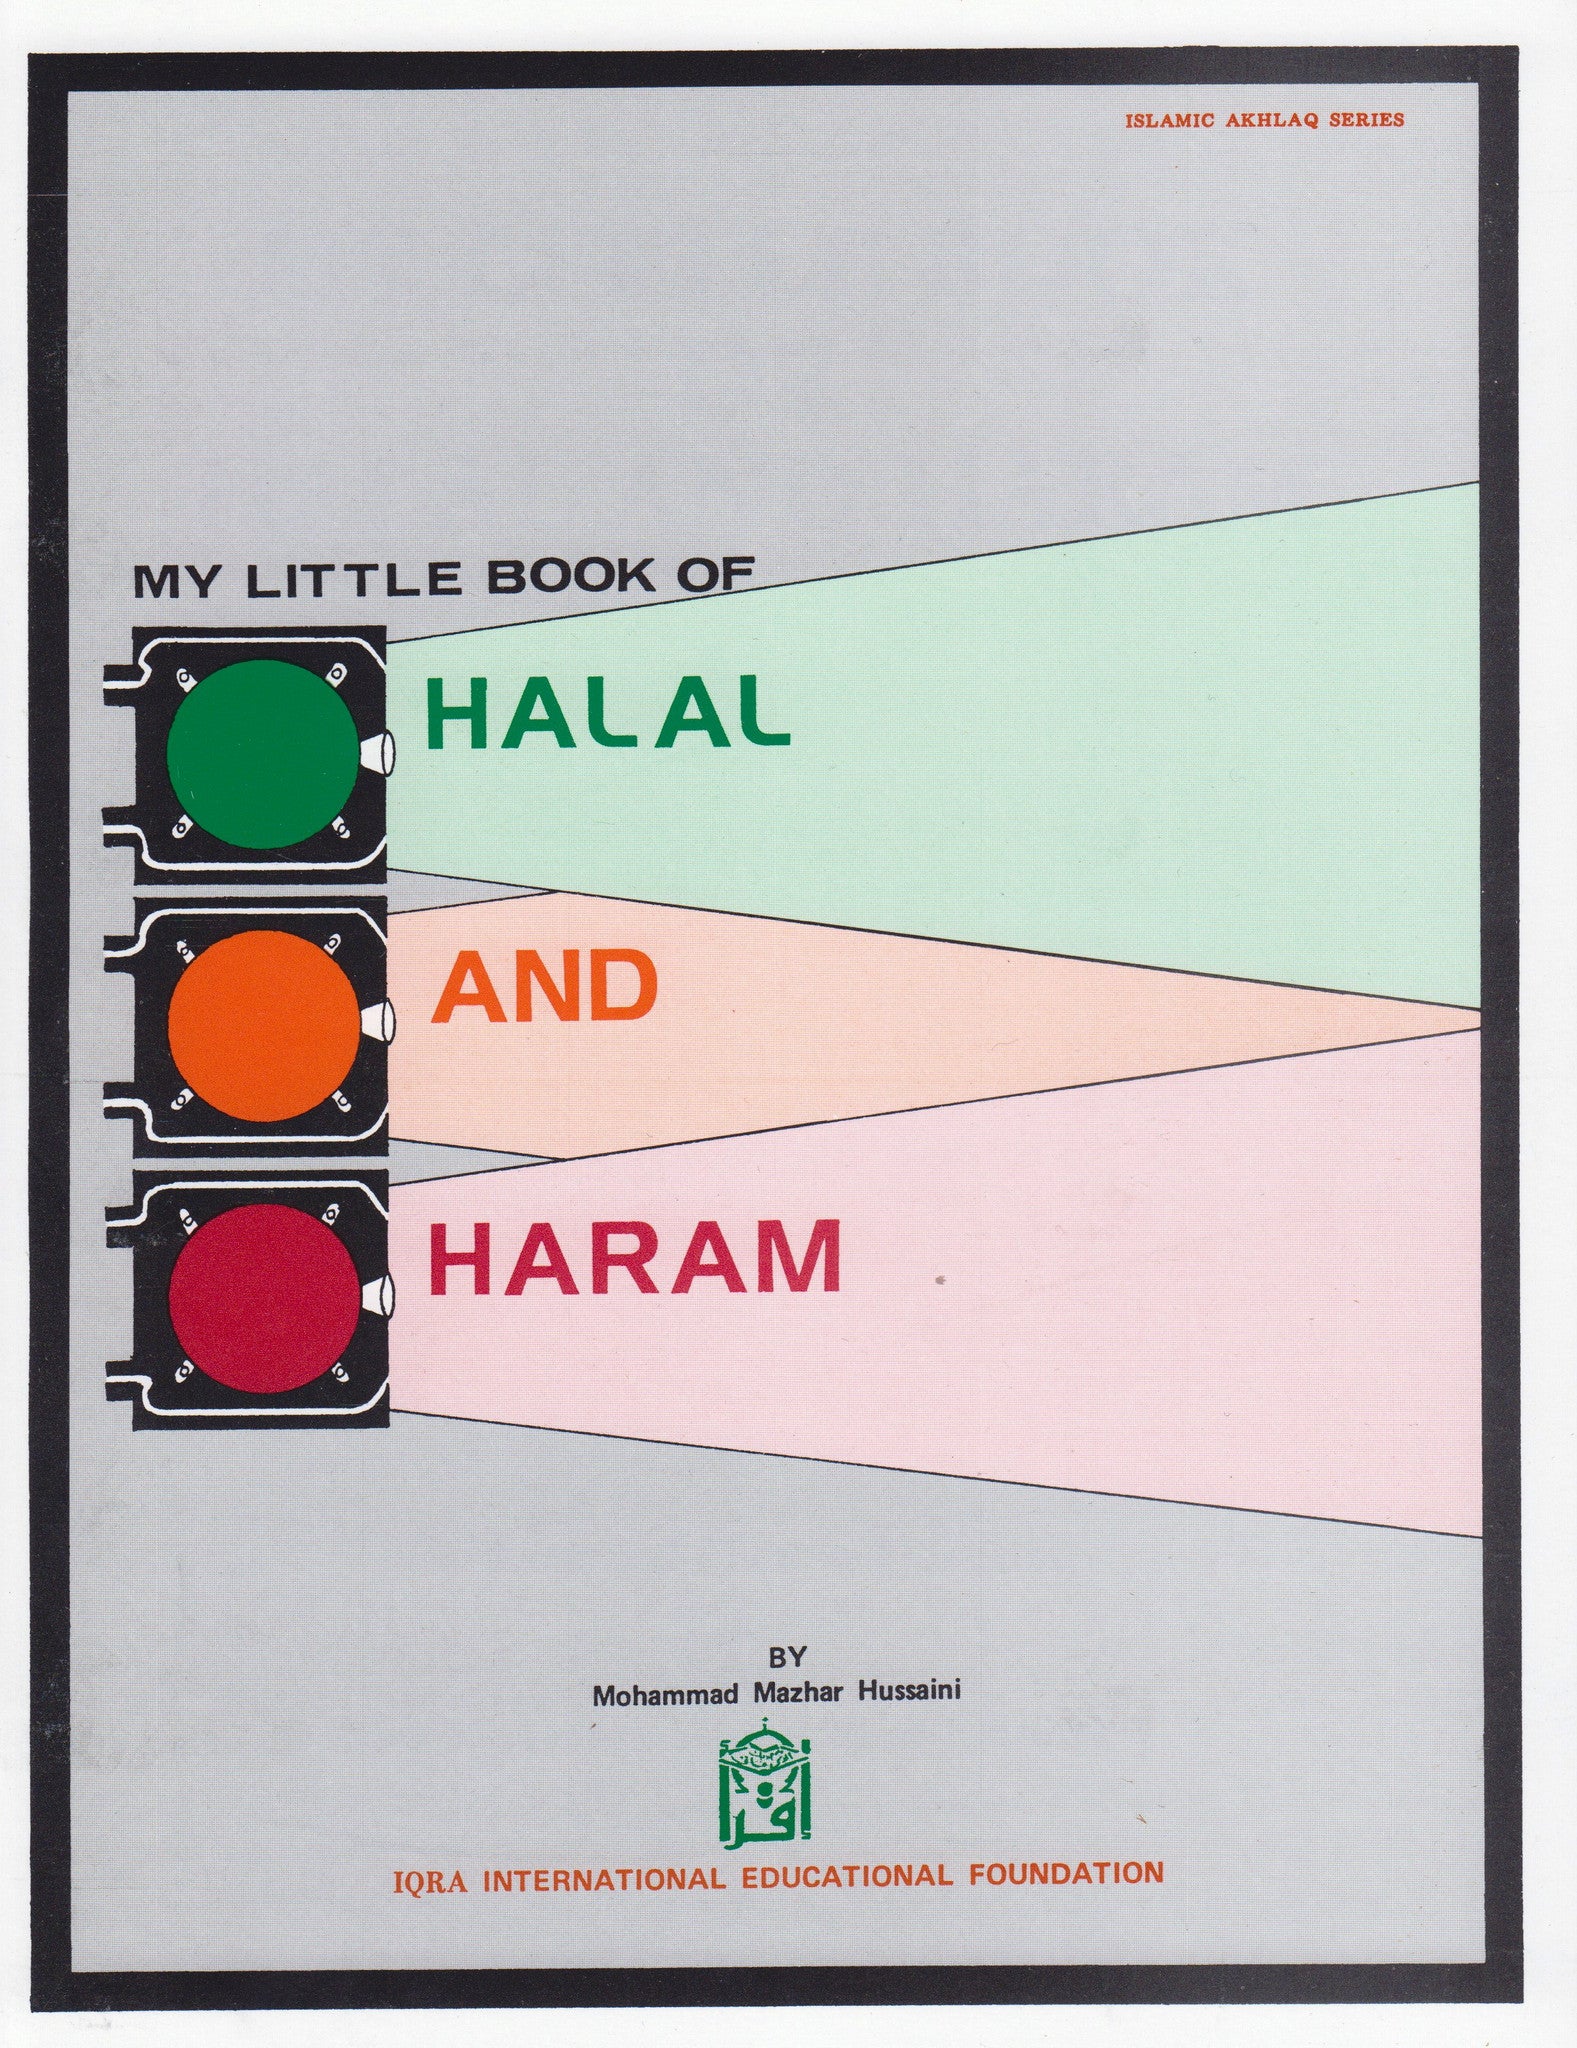 My Little Book of Halal and Haram